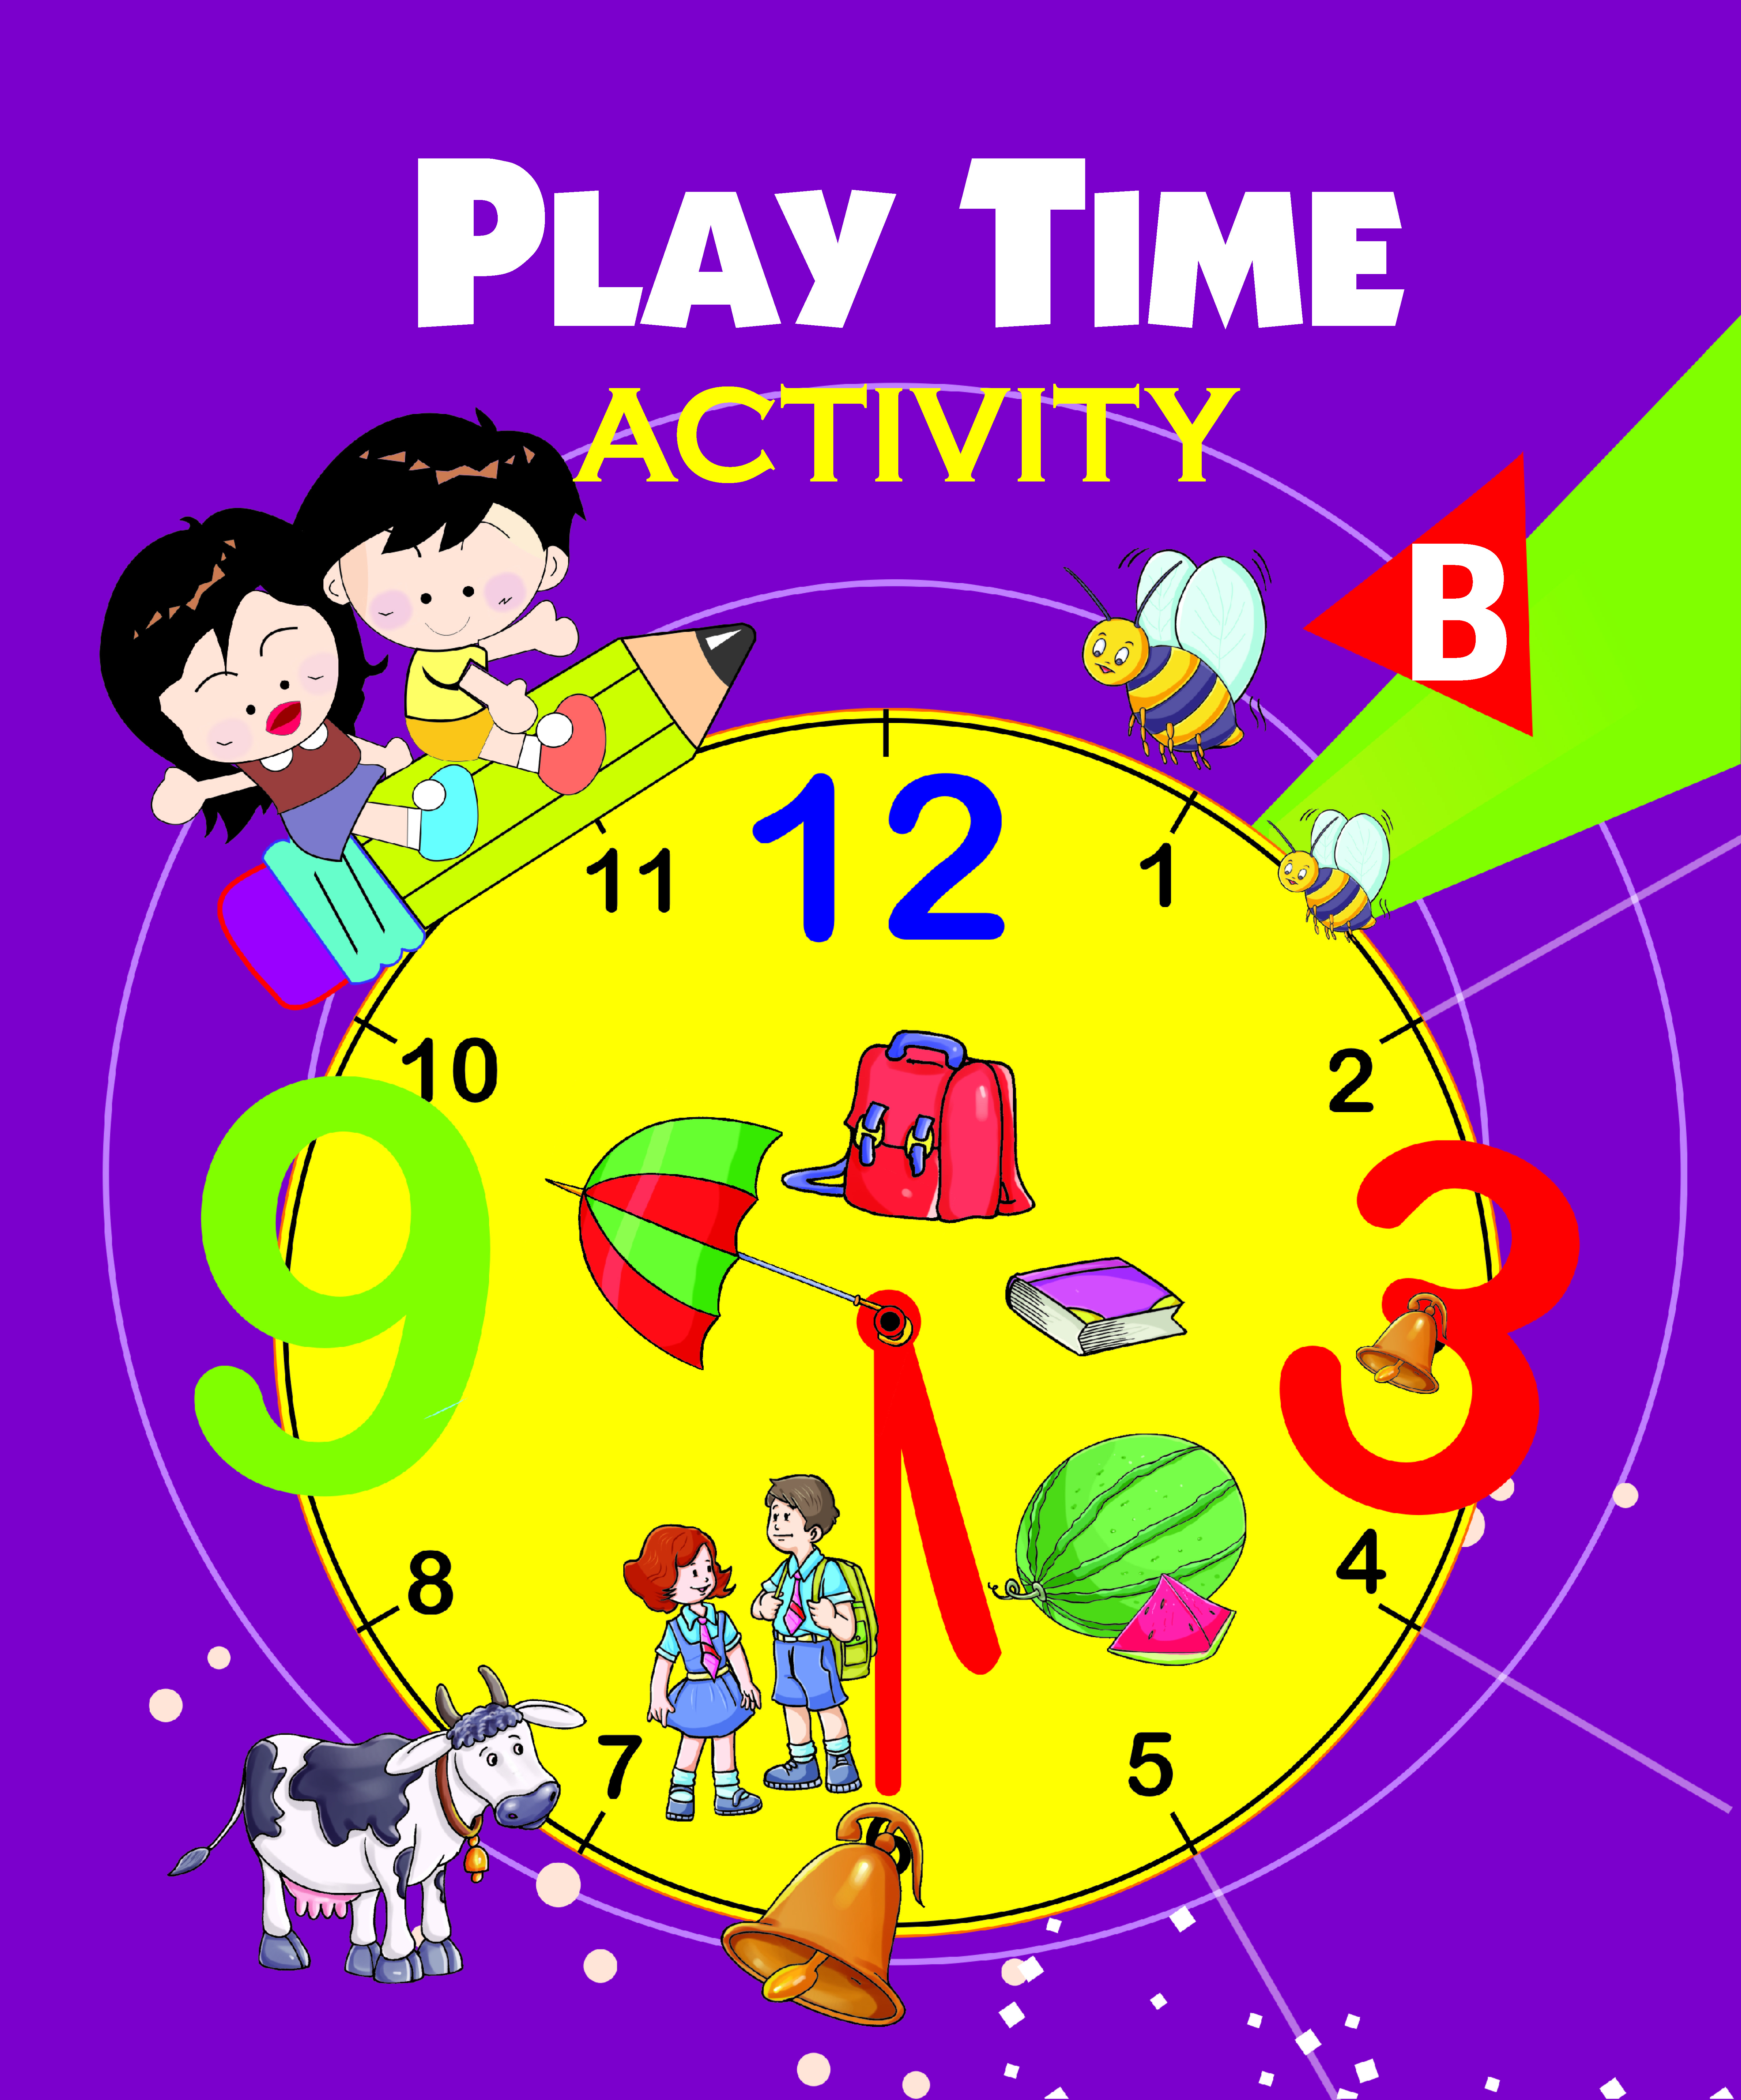 PLAY TIME ACTIVITY B